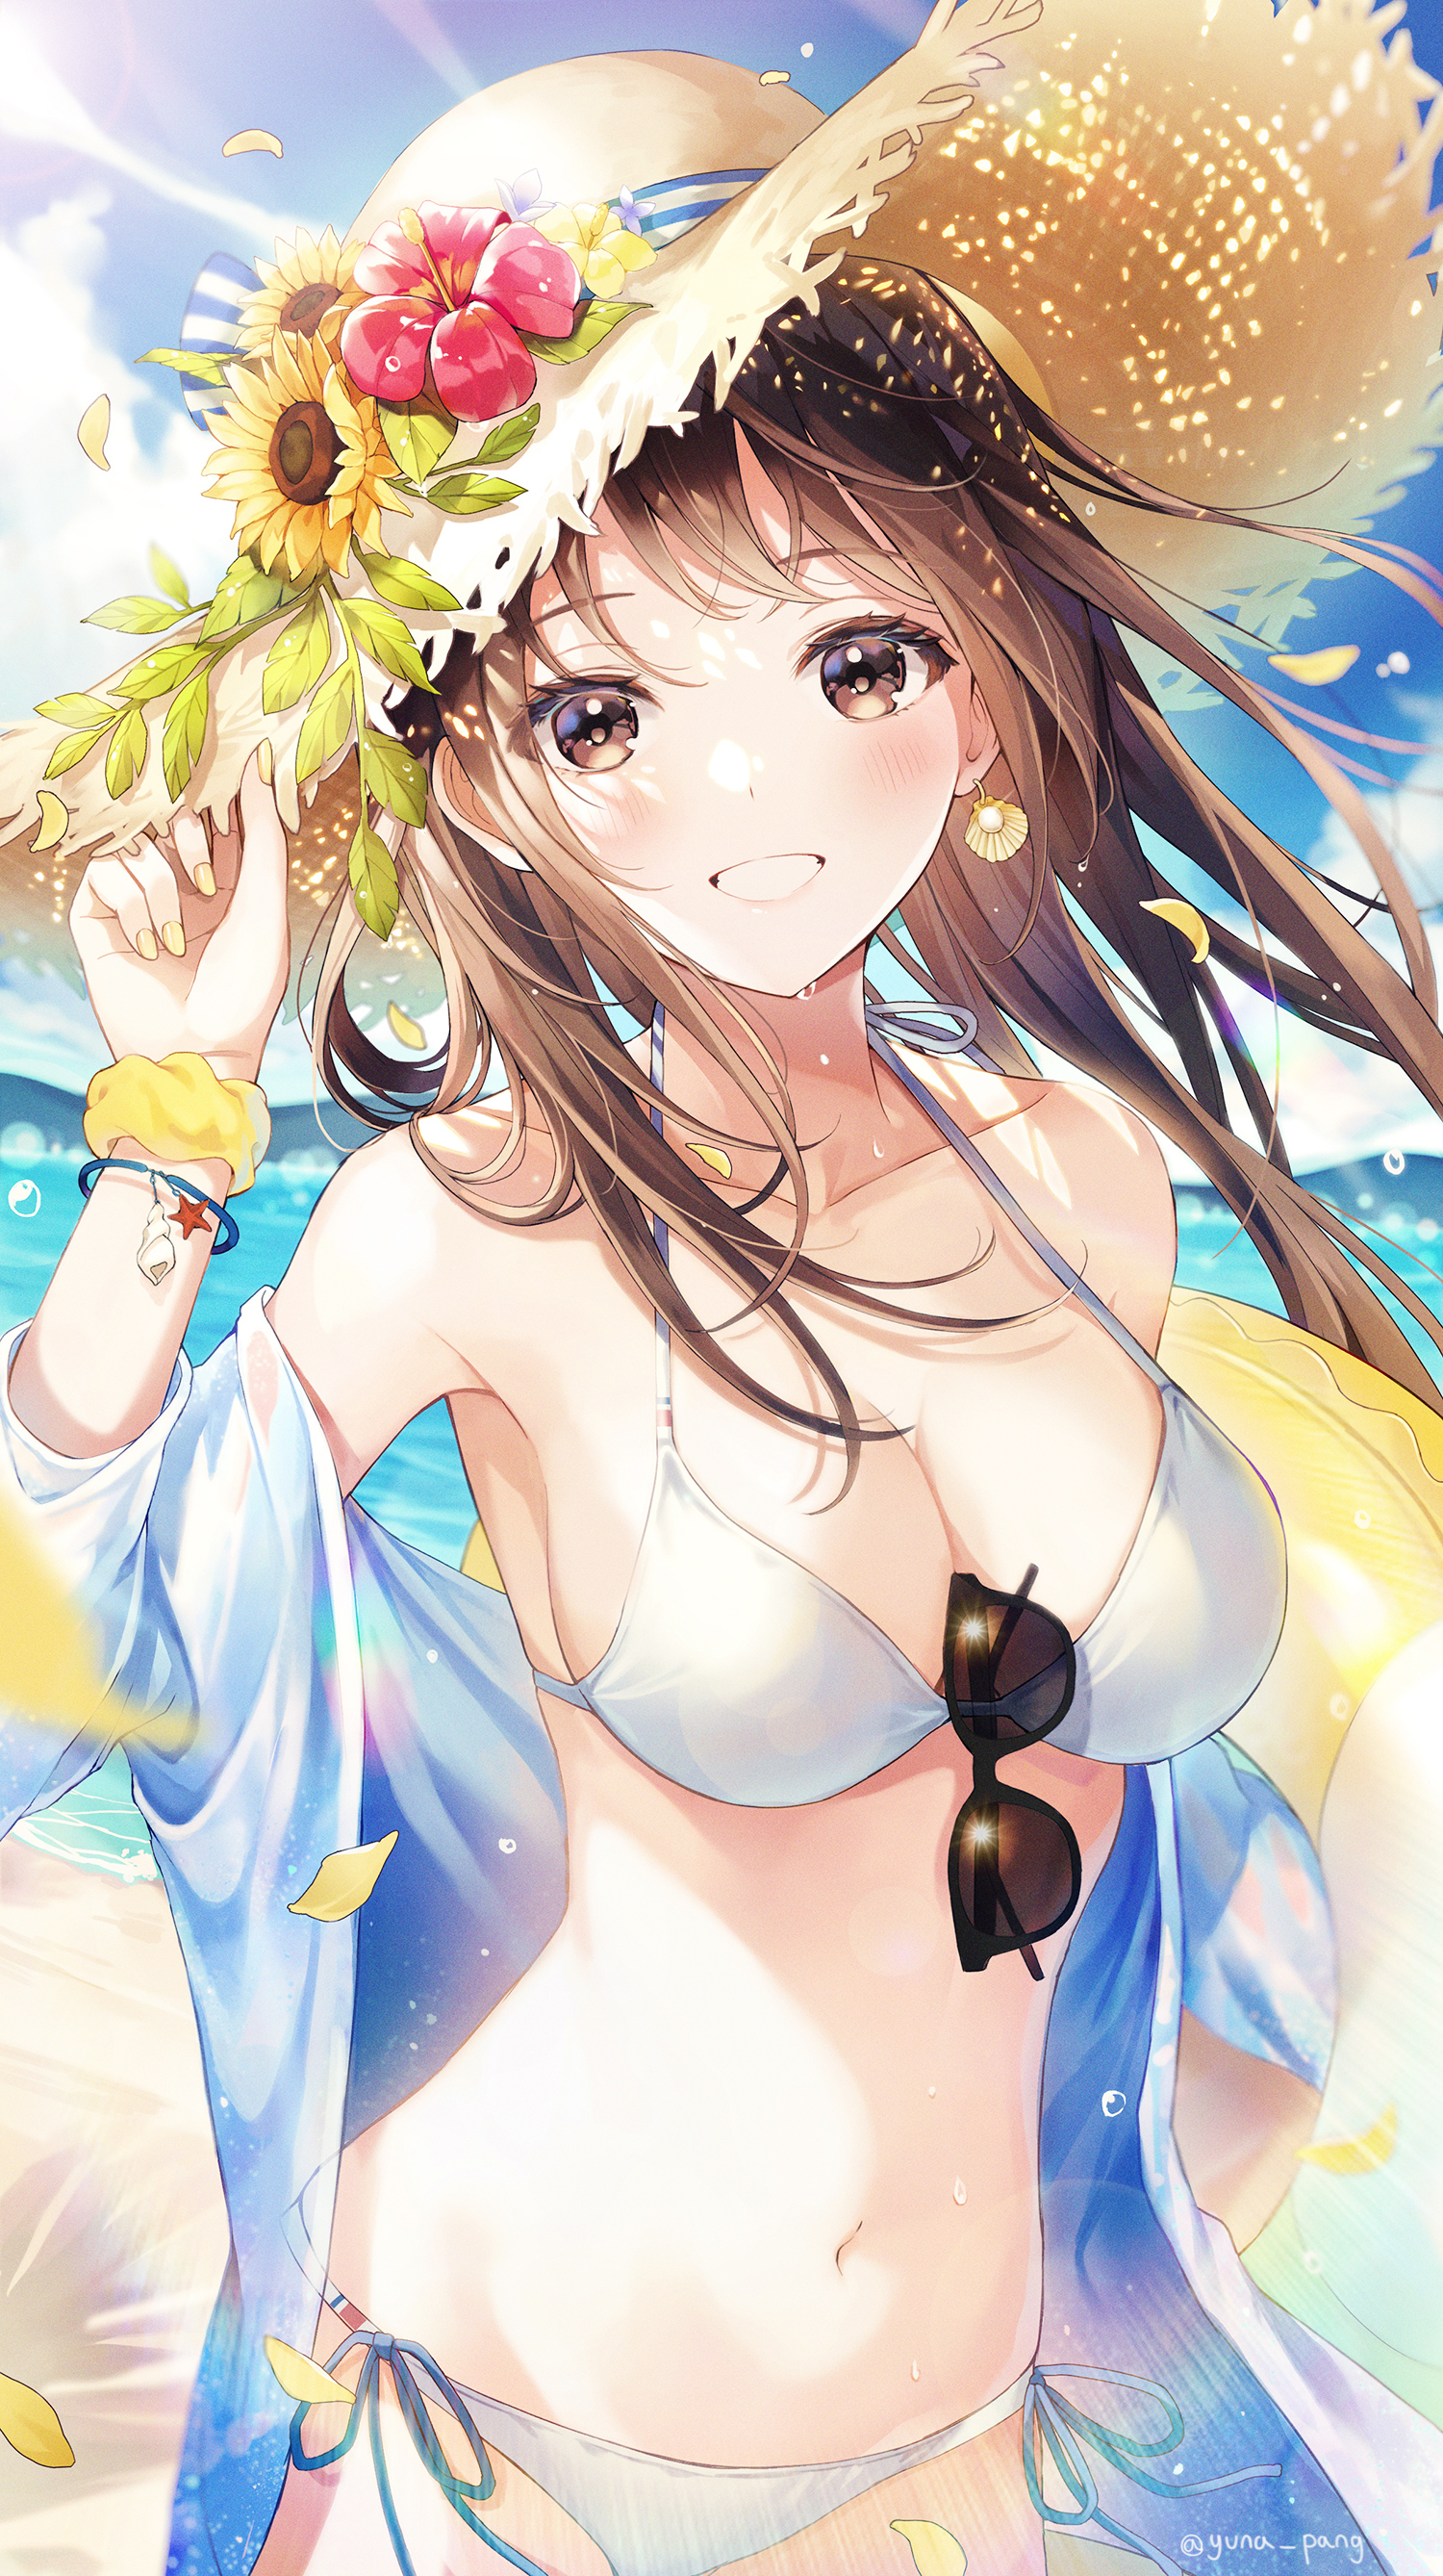 Anime 1500x2677 Yuna Pang portrait display anime girls bikini white bikini sunlight hat looking at viewer straw hat sun hats smiling big boobs item between boobs sky frontal view belly button belly cleavage glasses sunglasses wet dappled sunlight water drops petals flowers water hibiscus sunflowers long hair earring bare shoulders leaves string bikini swimwear waves floater windy Pixiv beach